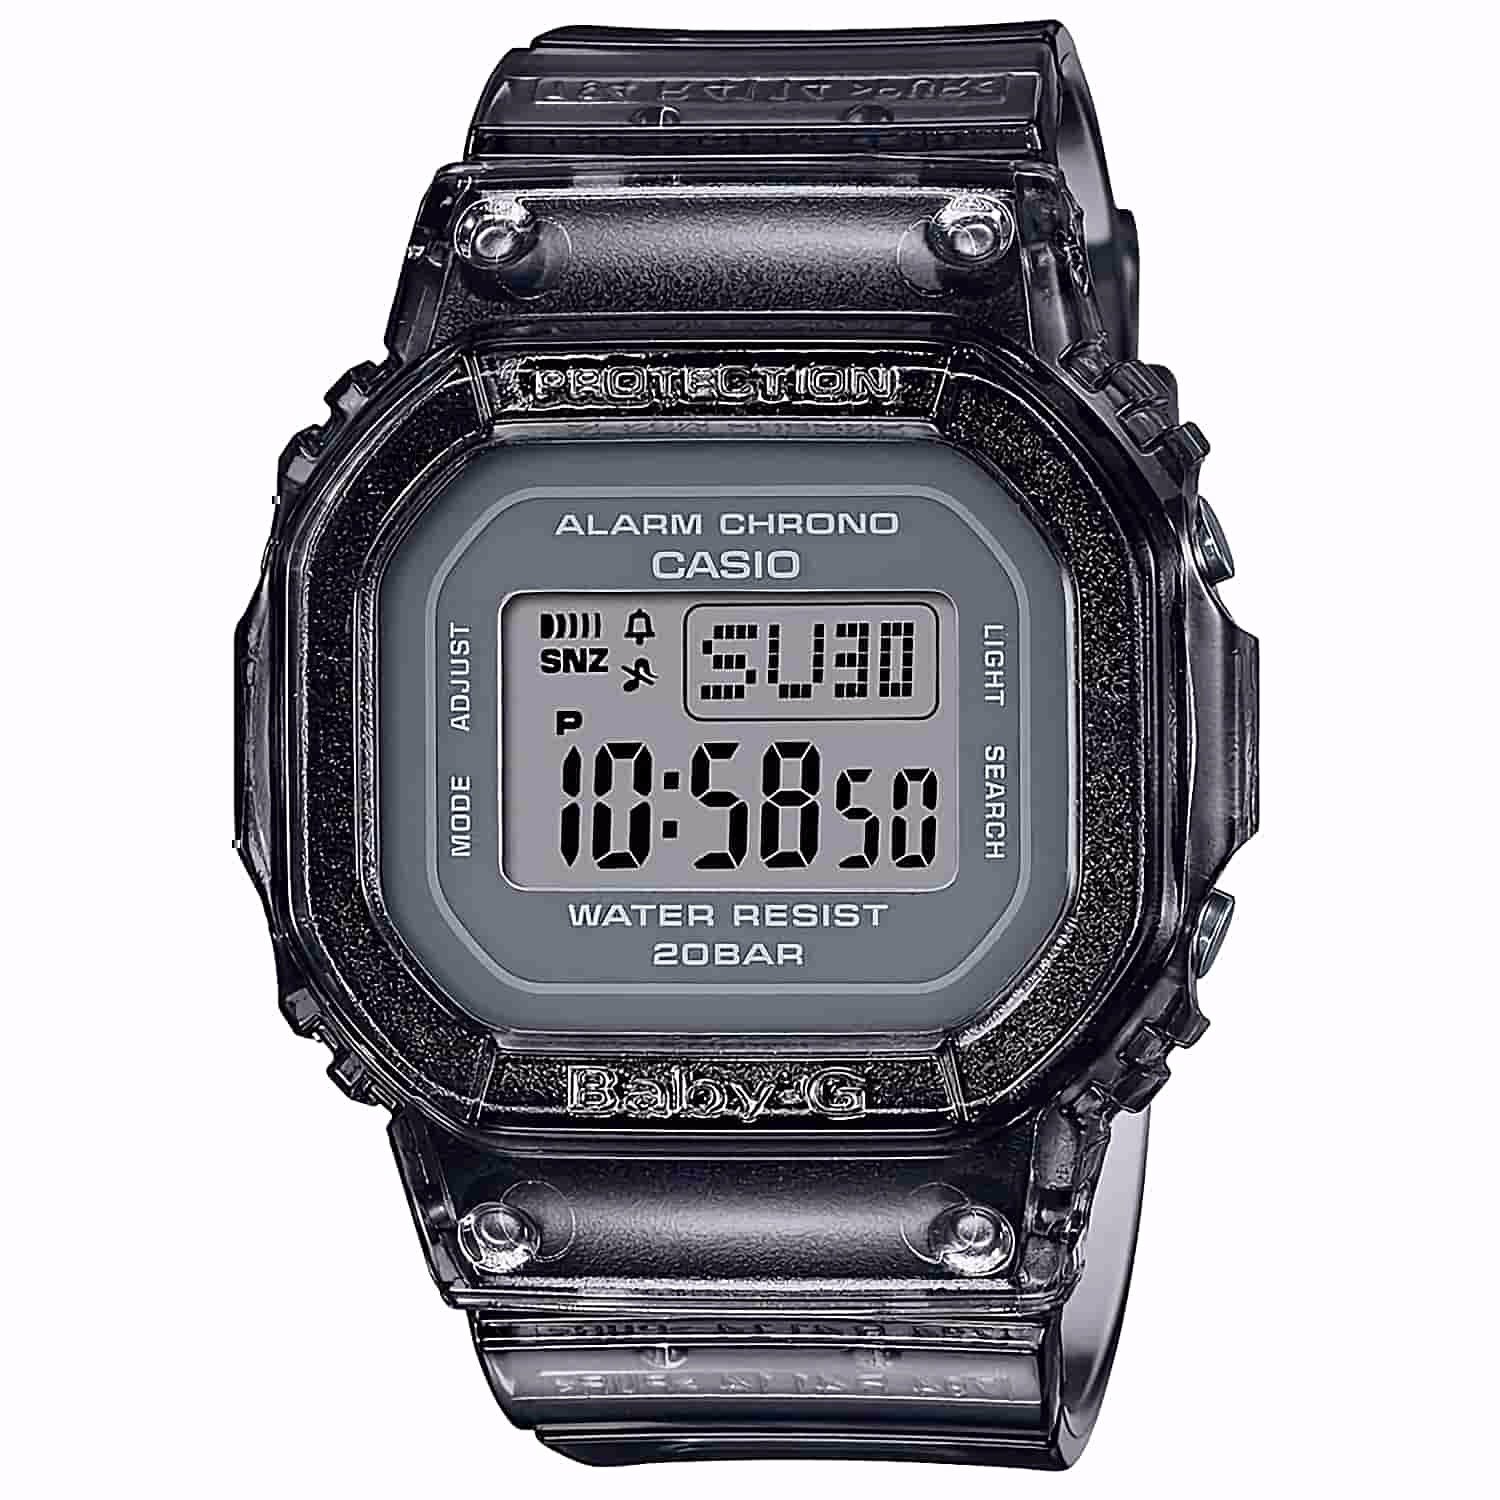 BGD560S-8D Casio BabY-G Watch. Trendy semi-transparent bands and cases create designs that are perfect for just about any summer outdoor scene. Available in 2 colours: purple or black. Base model is the standard popular square face BGD-560.s LAYBUY - @chr